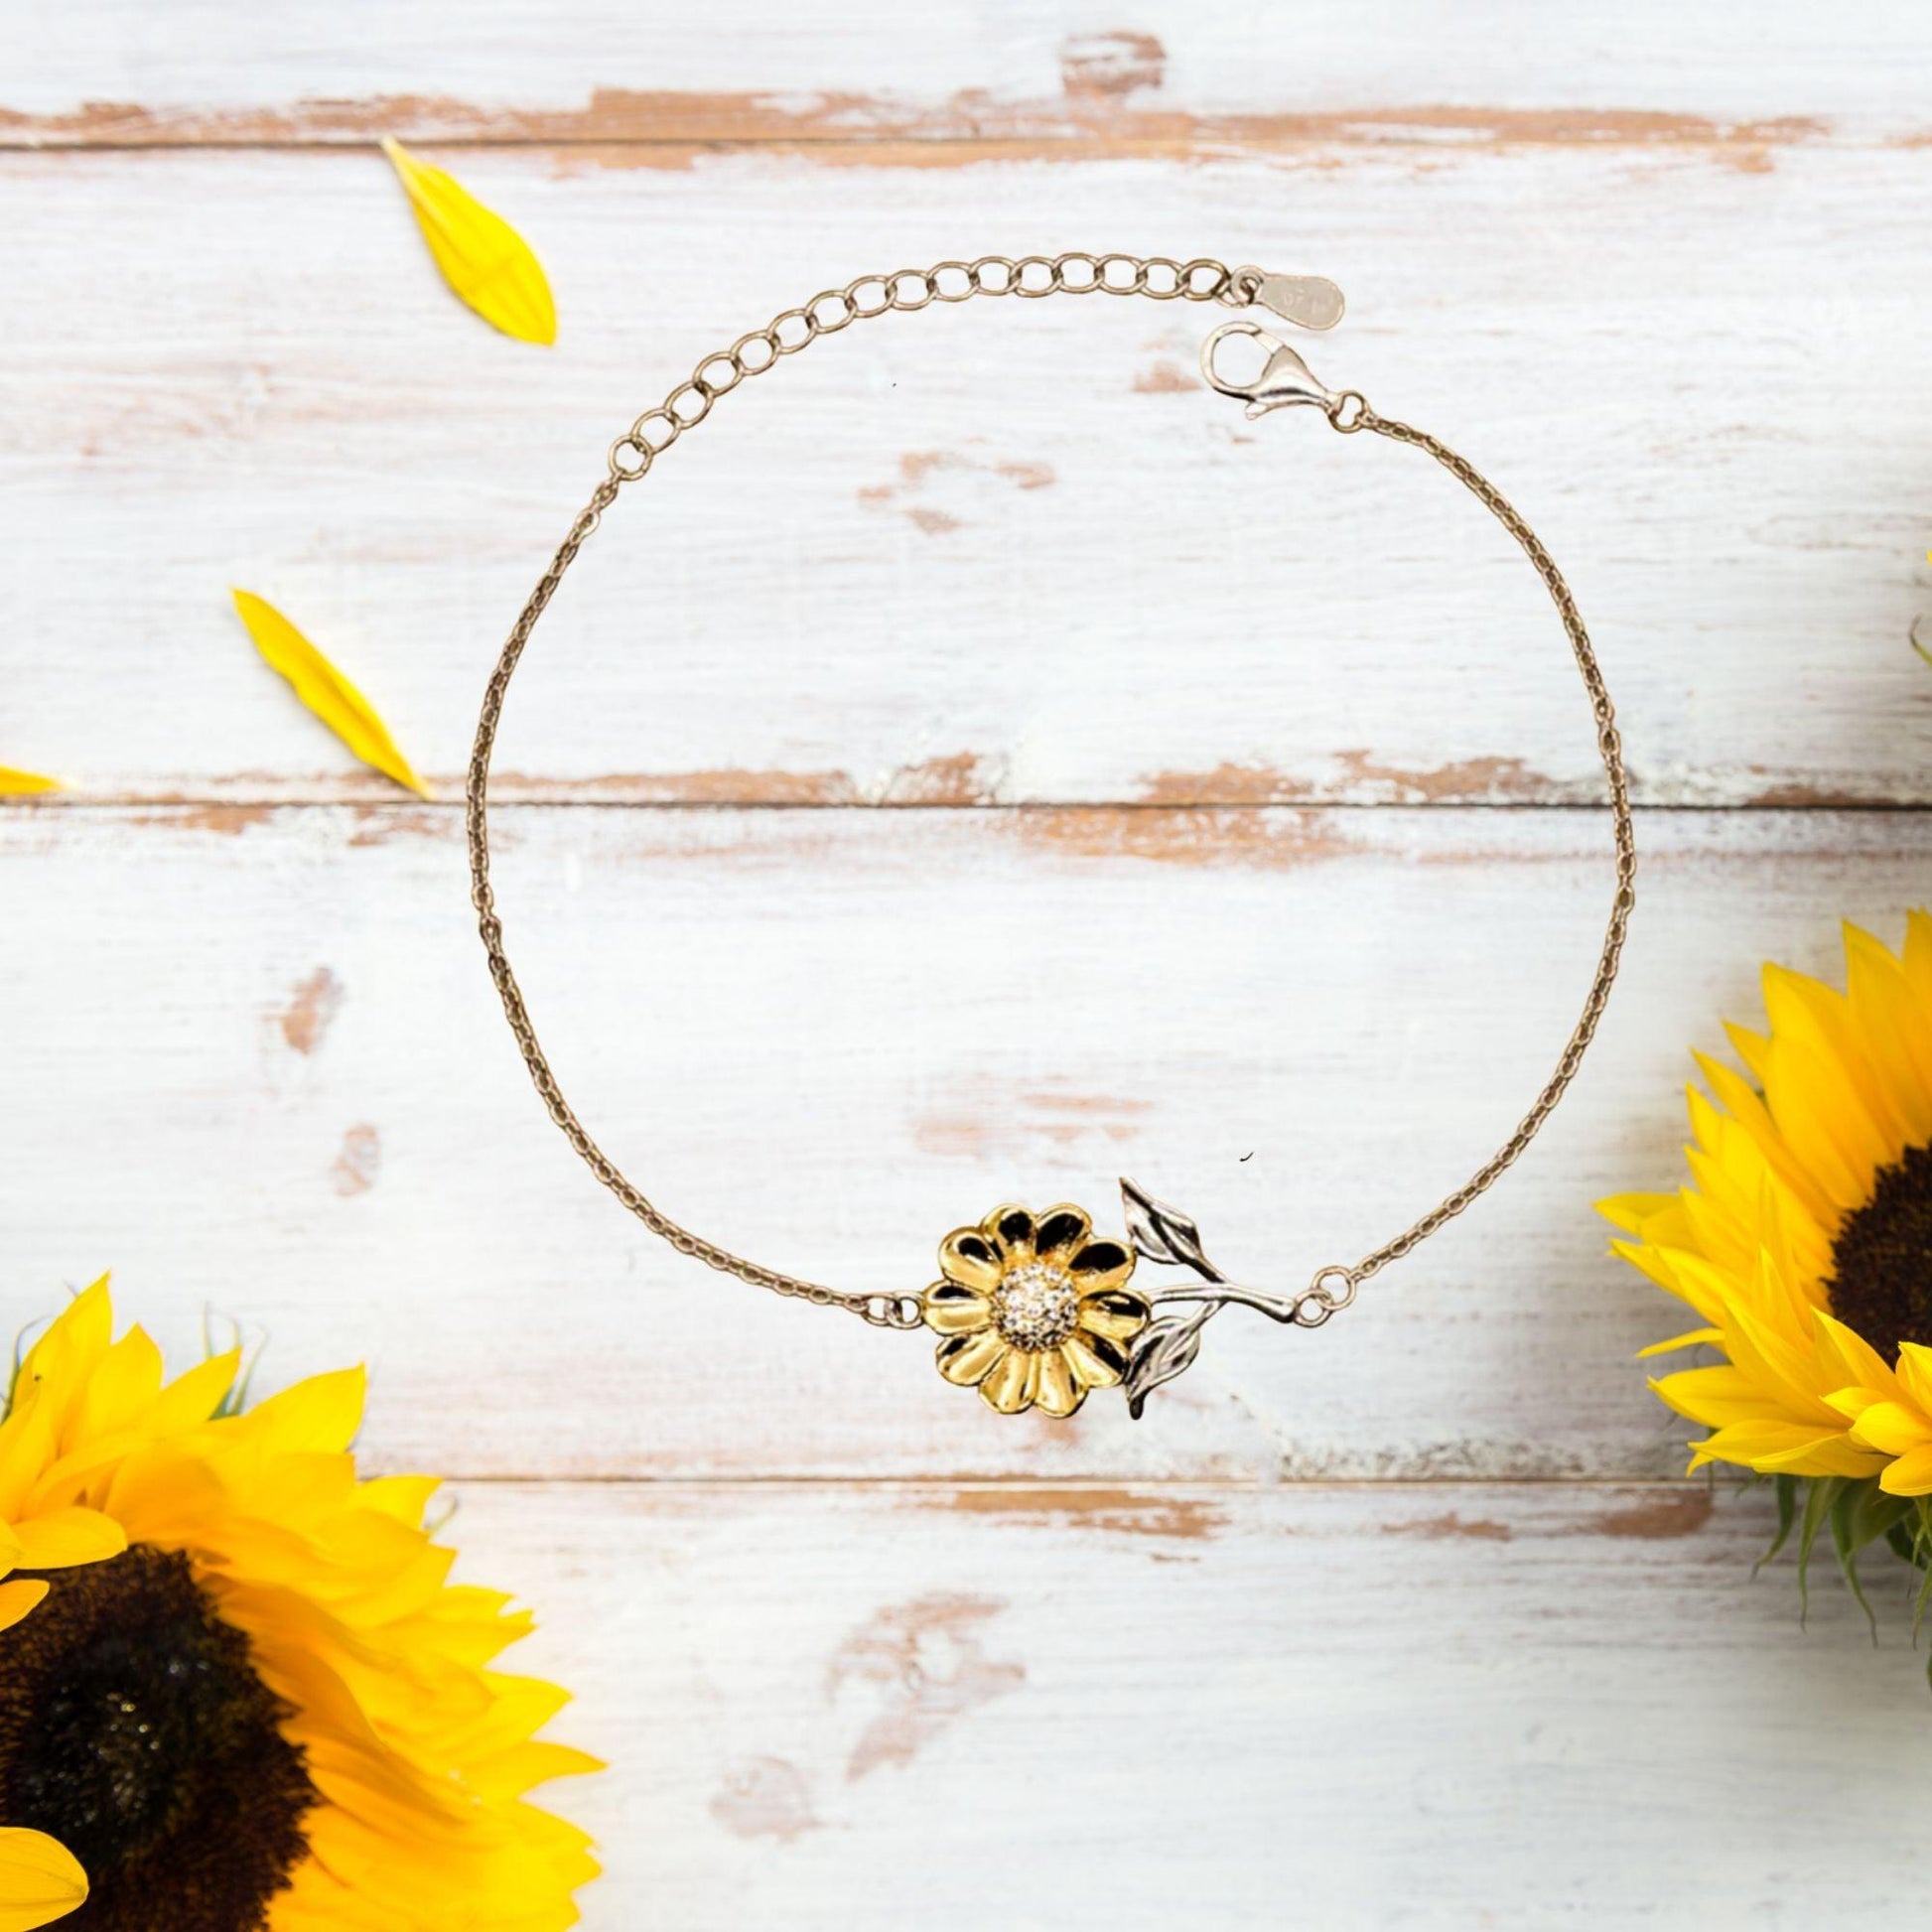 School Bus DriverSunflower Bracelet - Thanks for being who you are - Birthday Christmas Jewelry Gifts Coworkers Colleague Boss - Mallard Moon Gift Shop